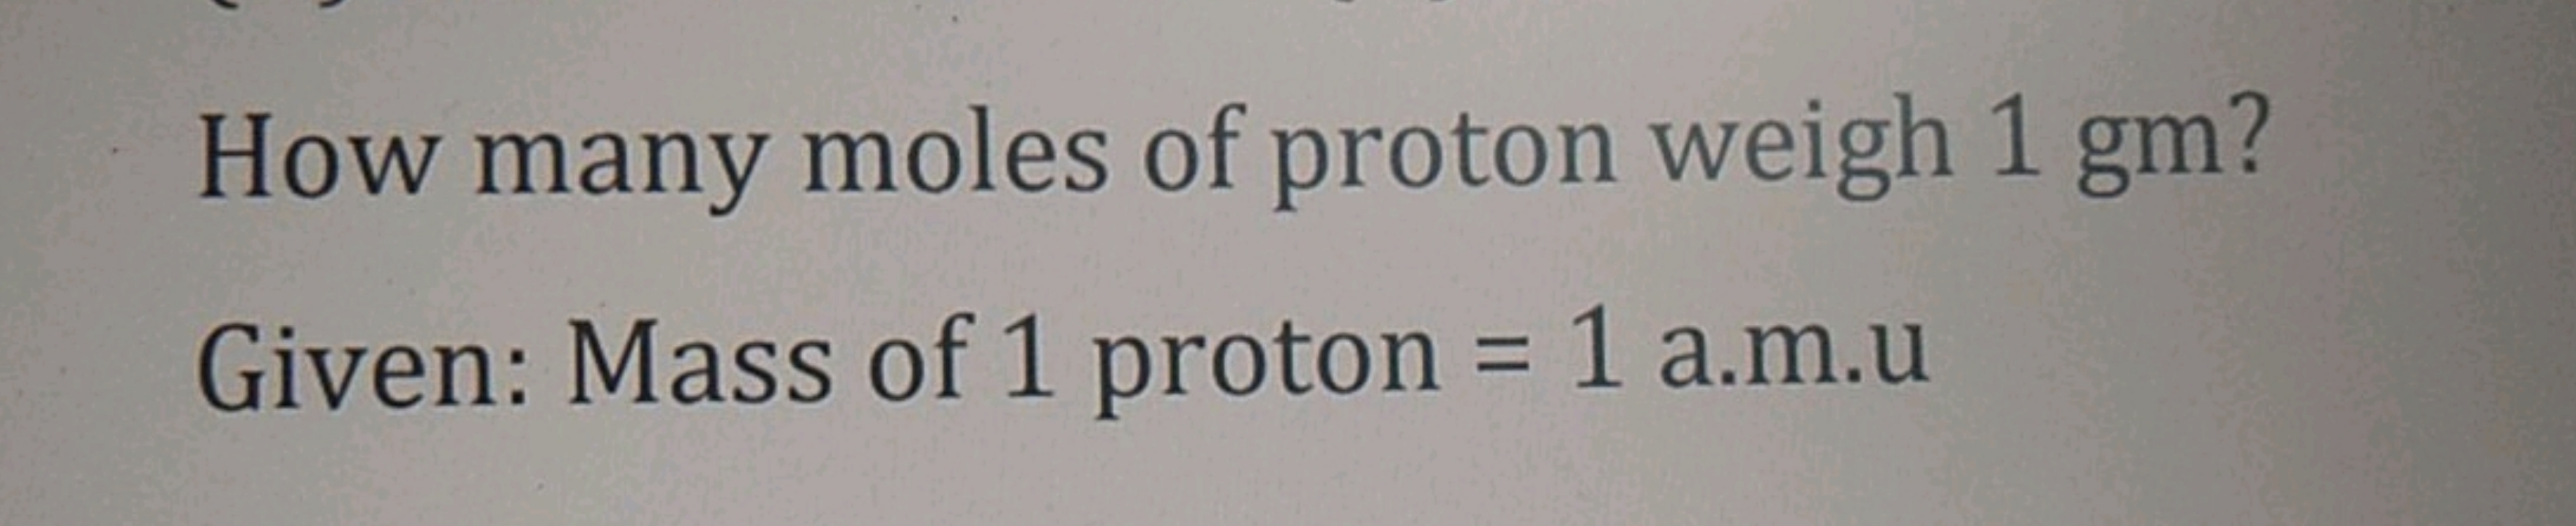 How many moles of proton weigh 1gm ?
Given: Mass of 1 proton = 1 a.m.u